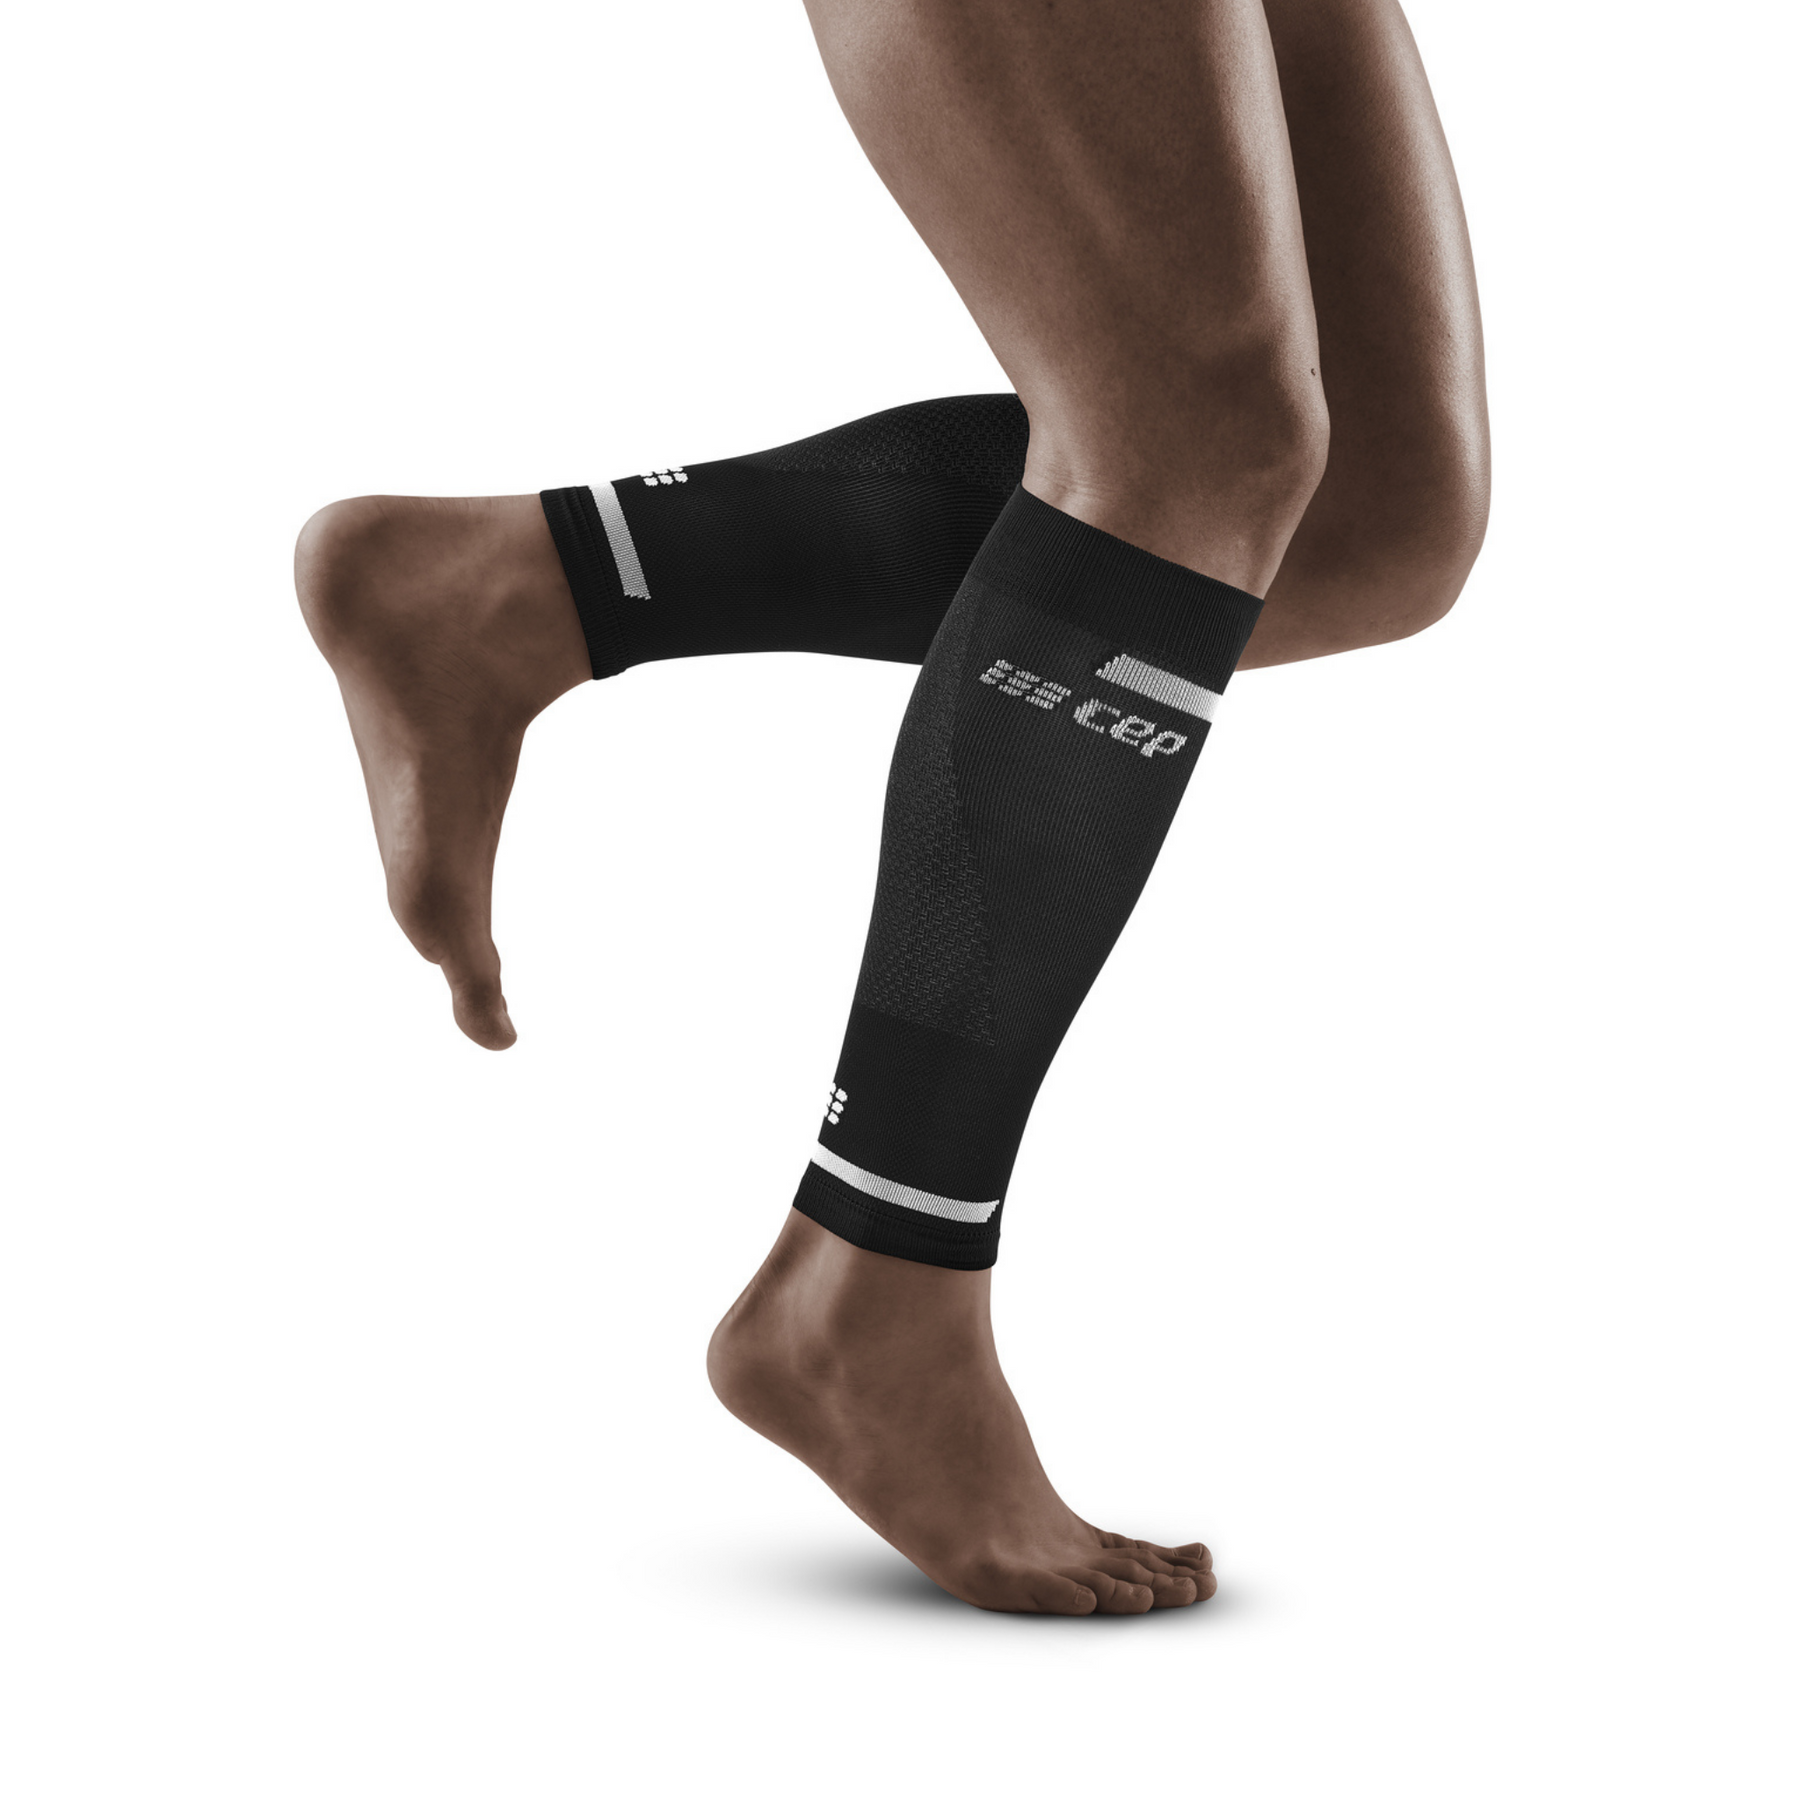 Light Speed Compression Calf Guards Black/Gold, Buy Light Speed Compression  Calf Guards Black/Gold here